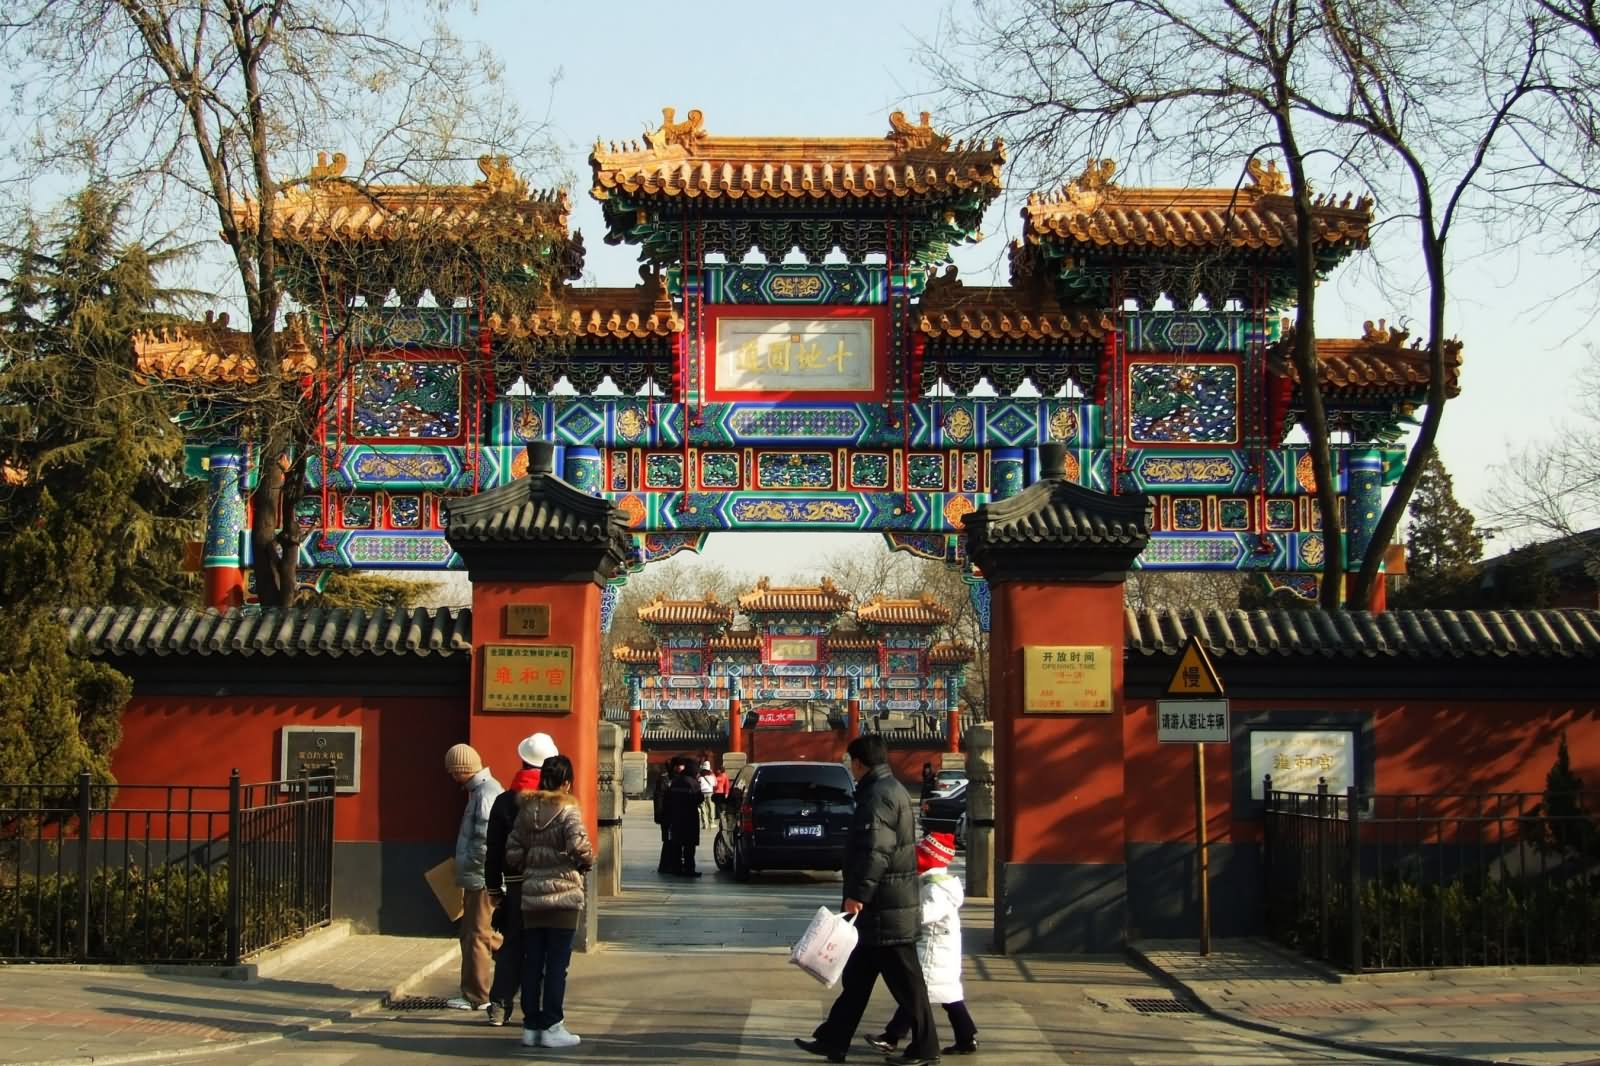 Main Entrance Of The Yonghe Temple, China